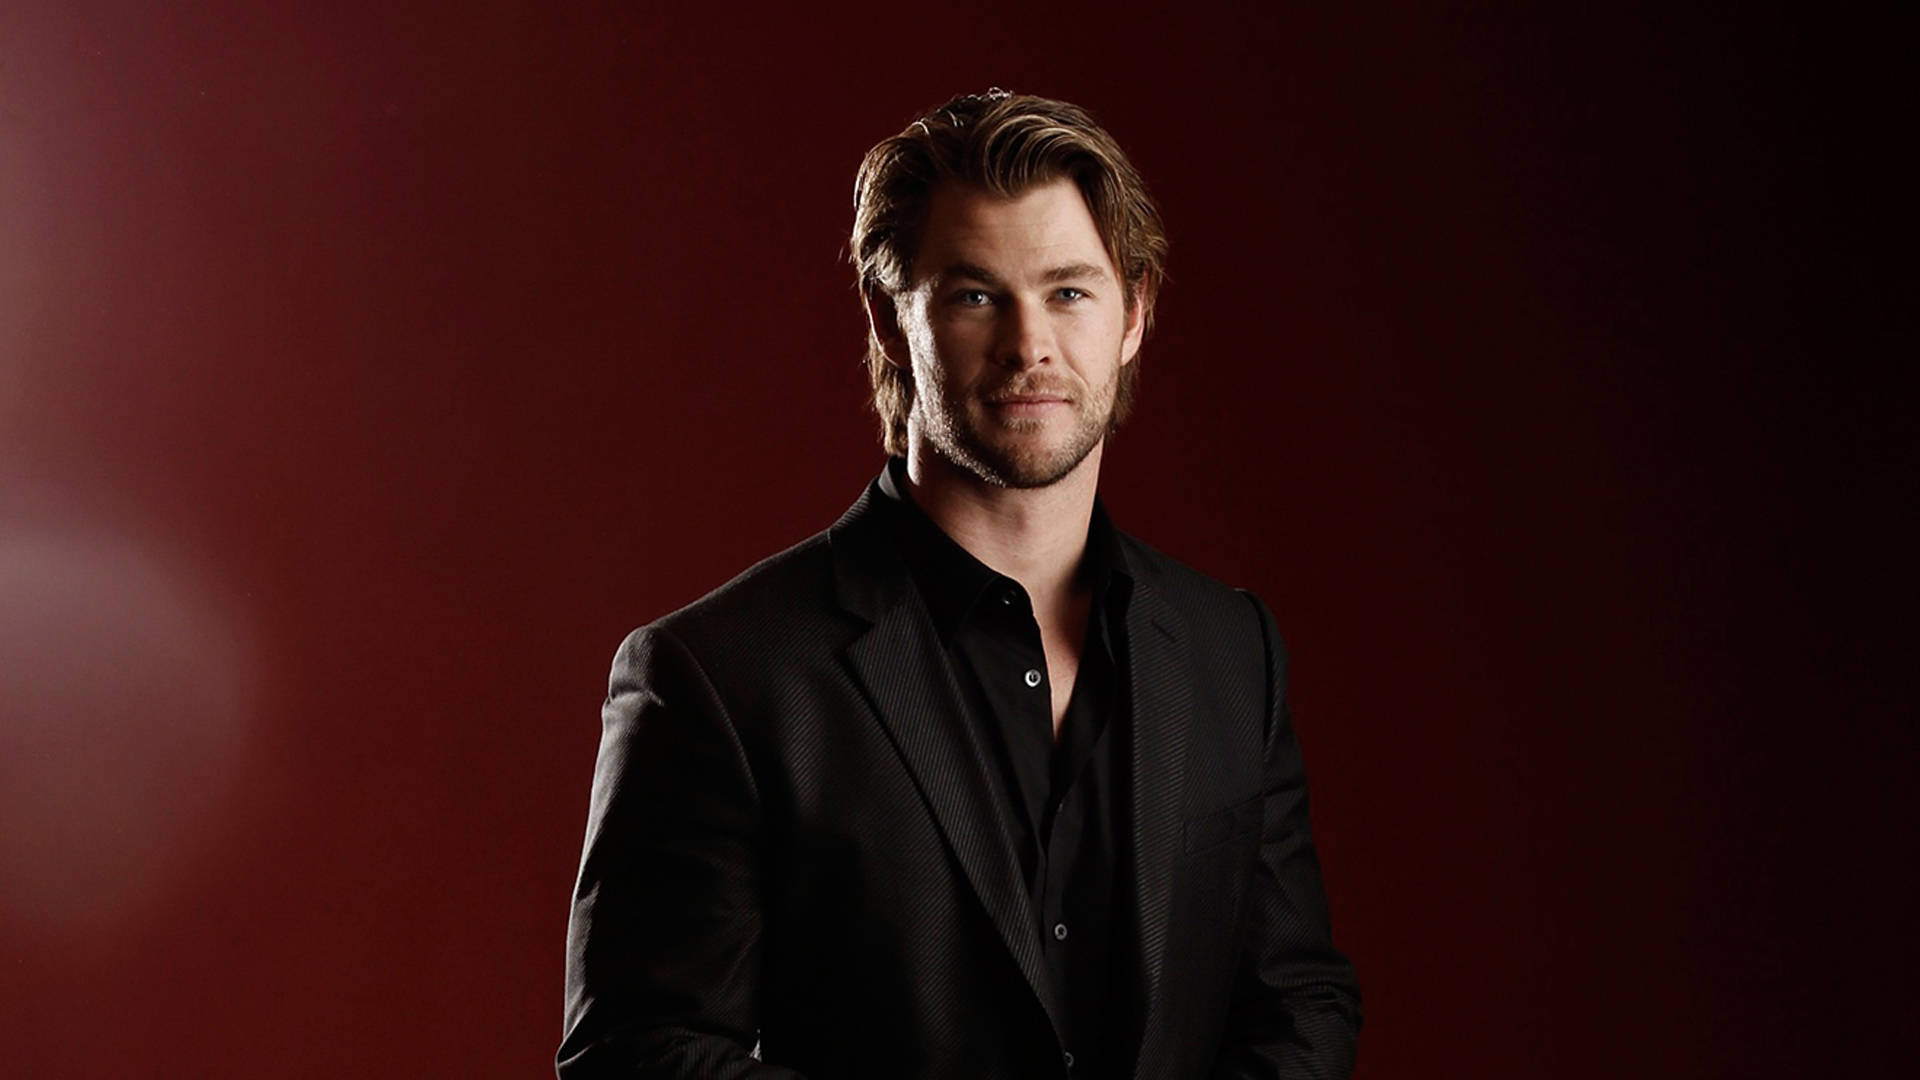 Chris Hemsworth in a Black Formal Outfit Wallpaper